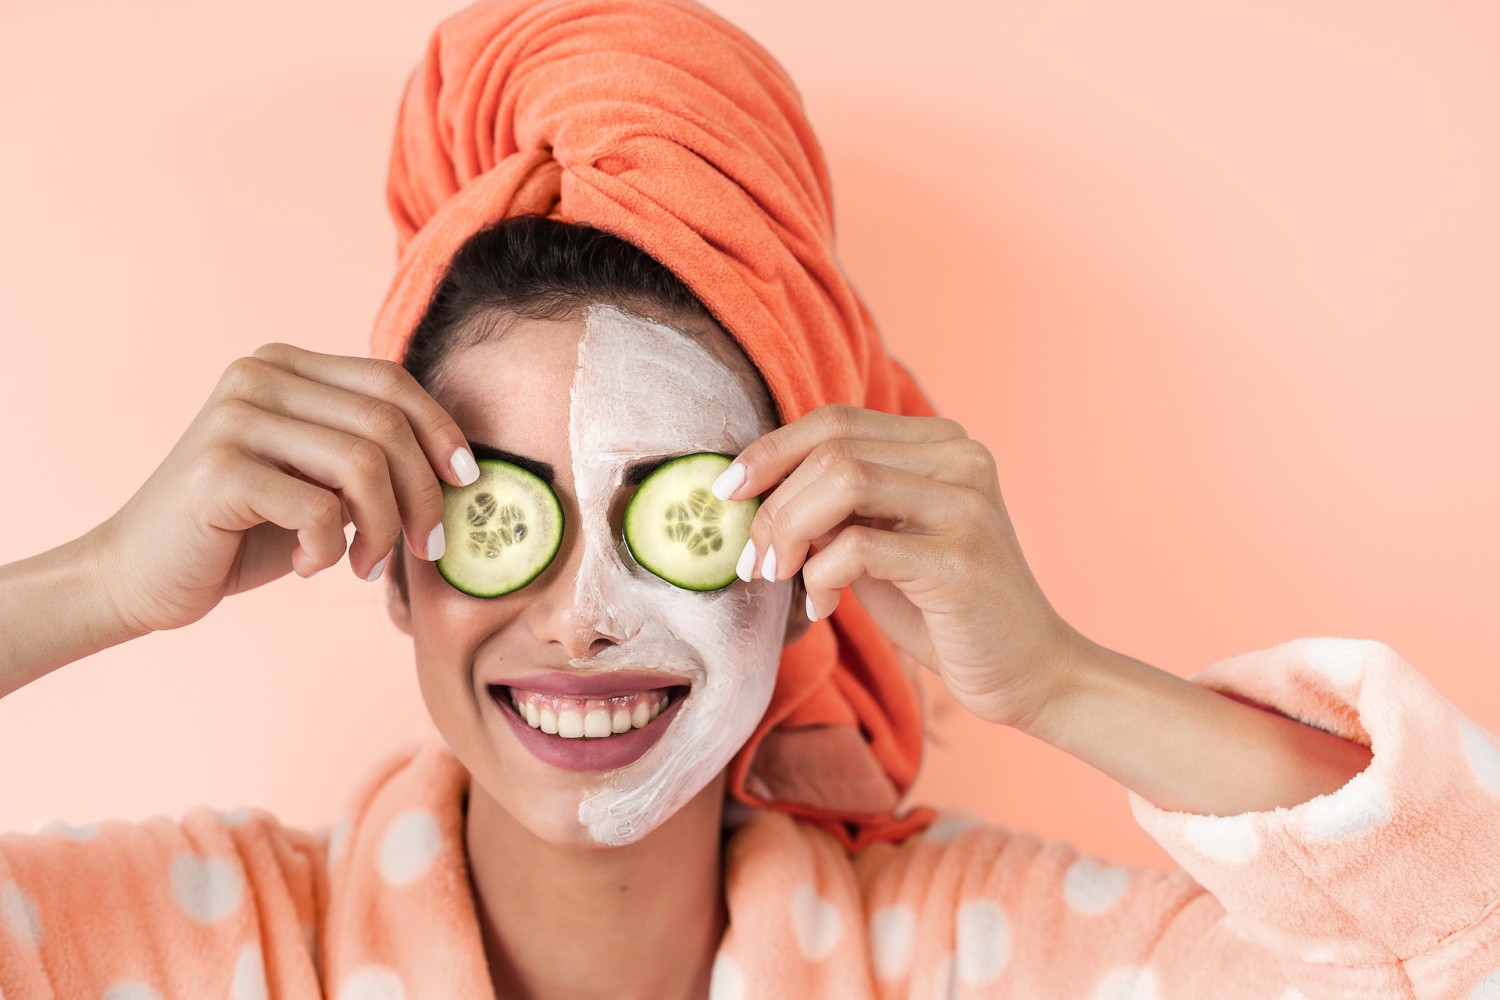 What Does Cucumber Do for the Skin and Undereyes?